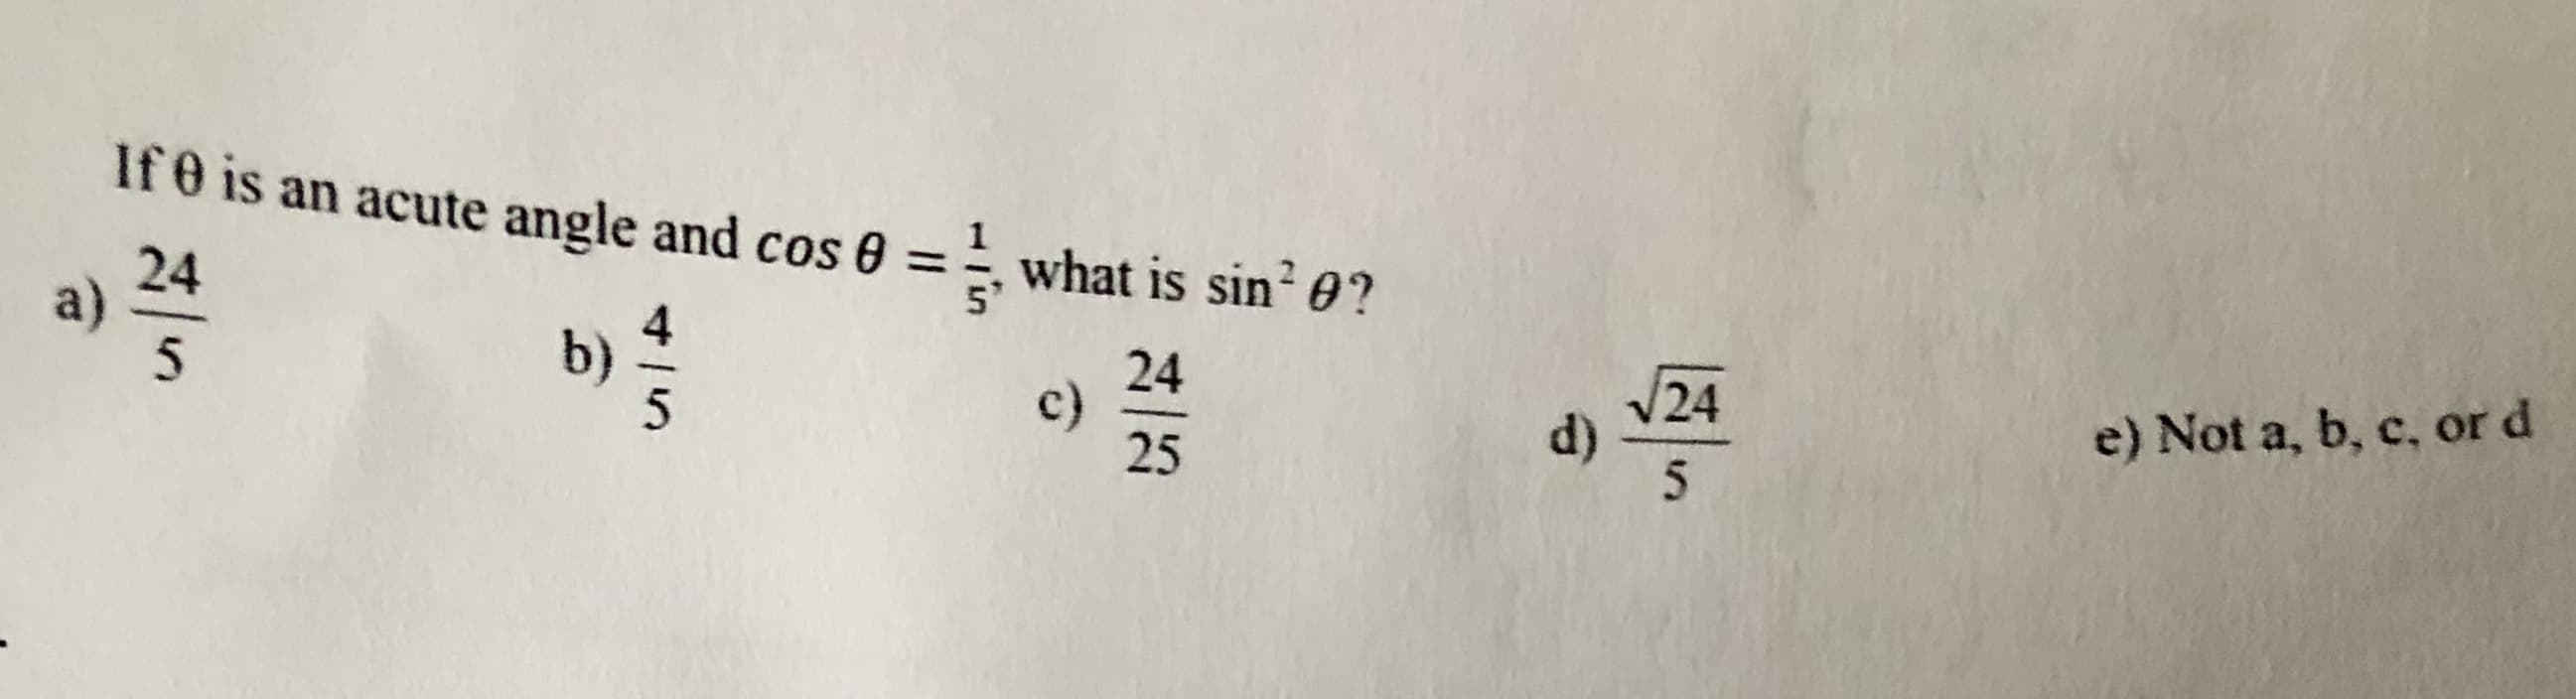 If e is an acute angle and cos 0 = what is sin 0?
24
a)
b)
24
c)
25
V24
d)
e) Not a, b, c, or d
